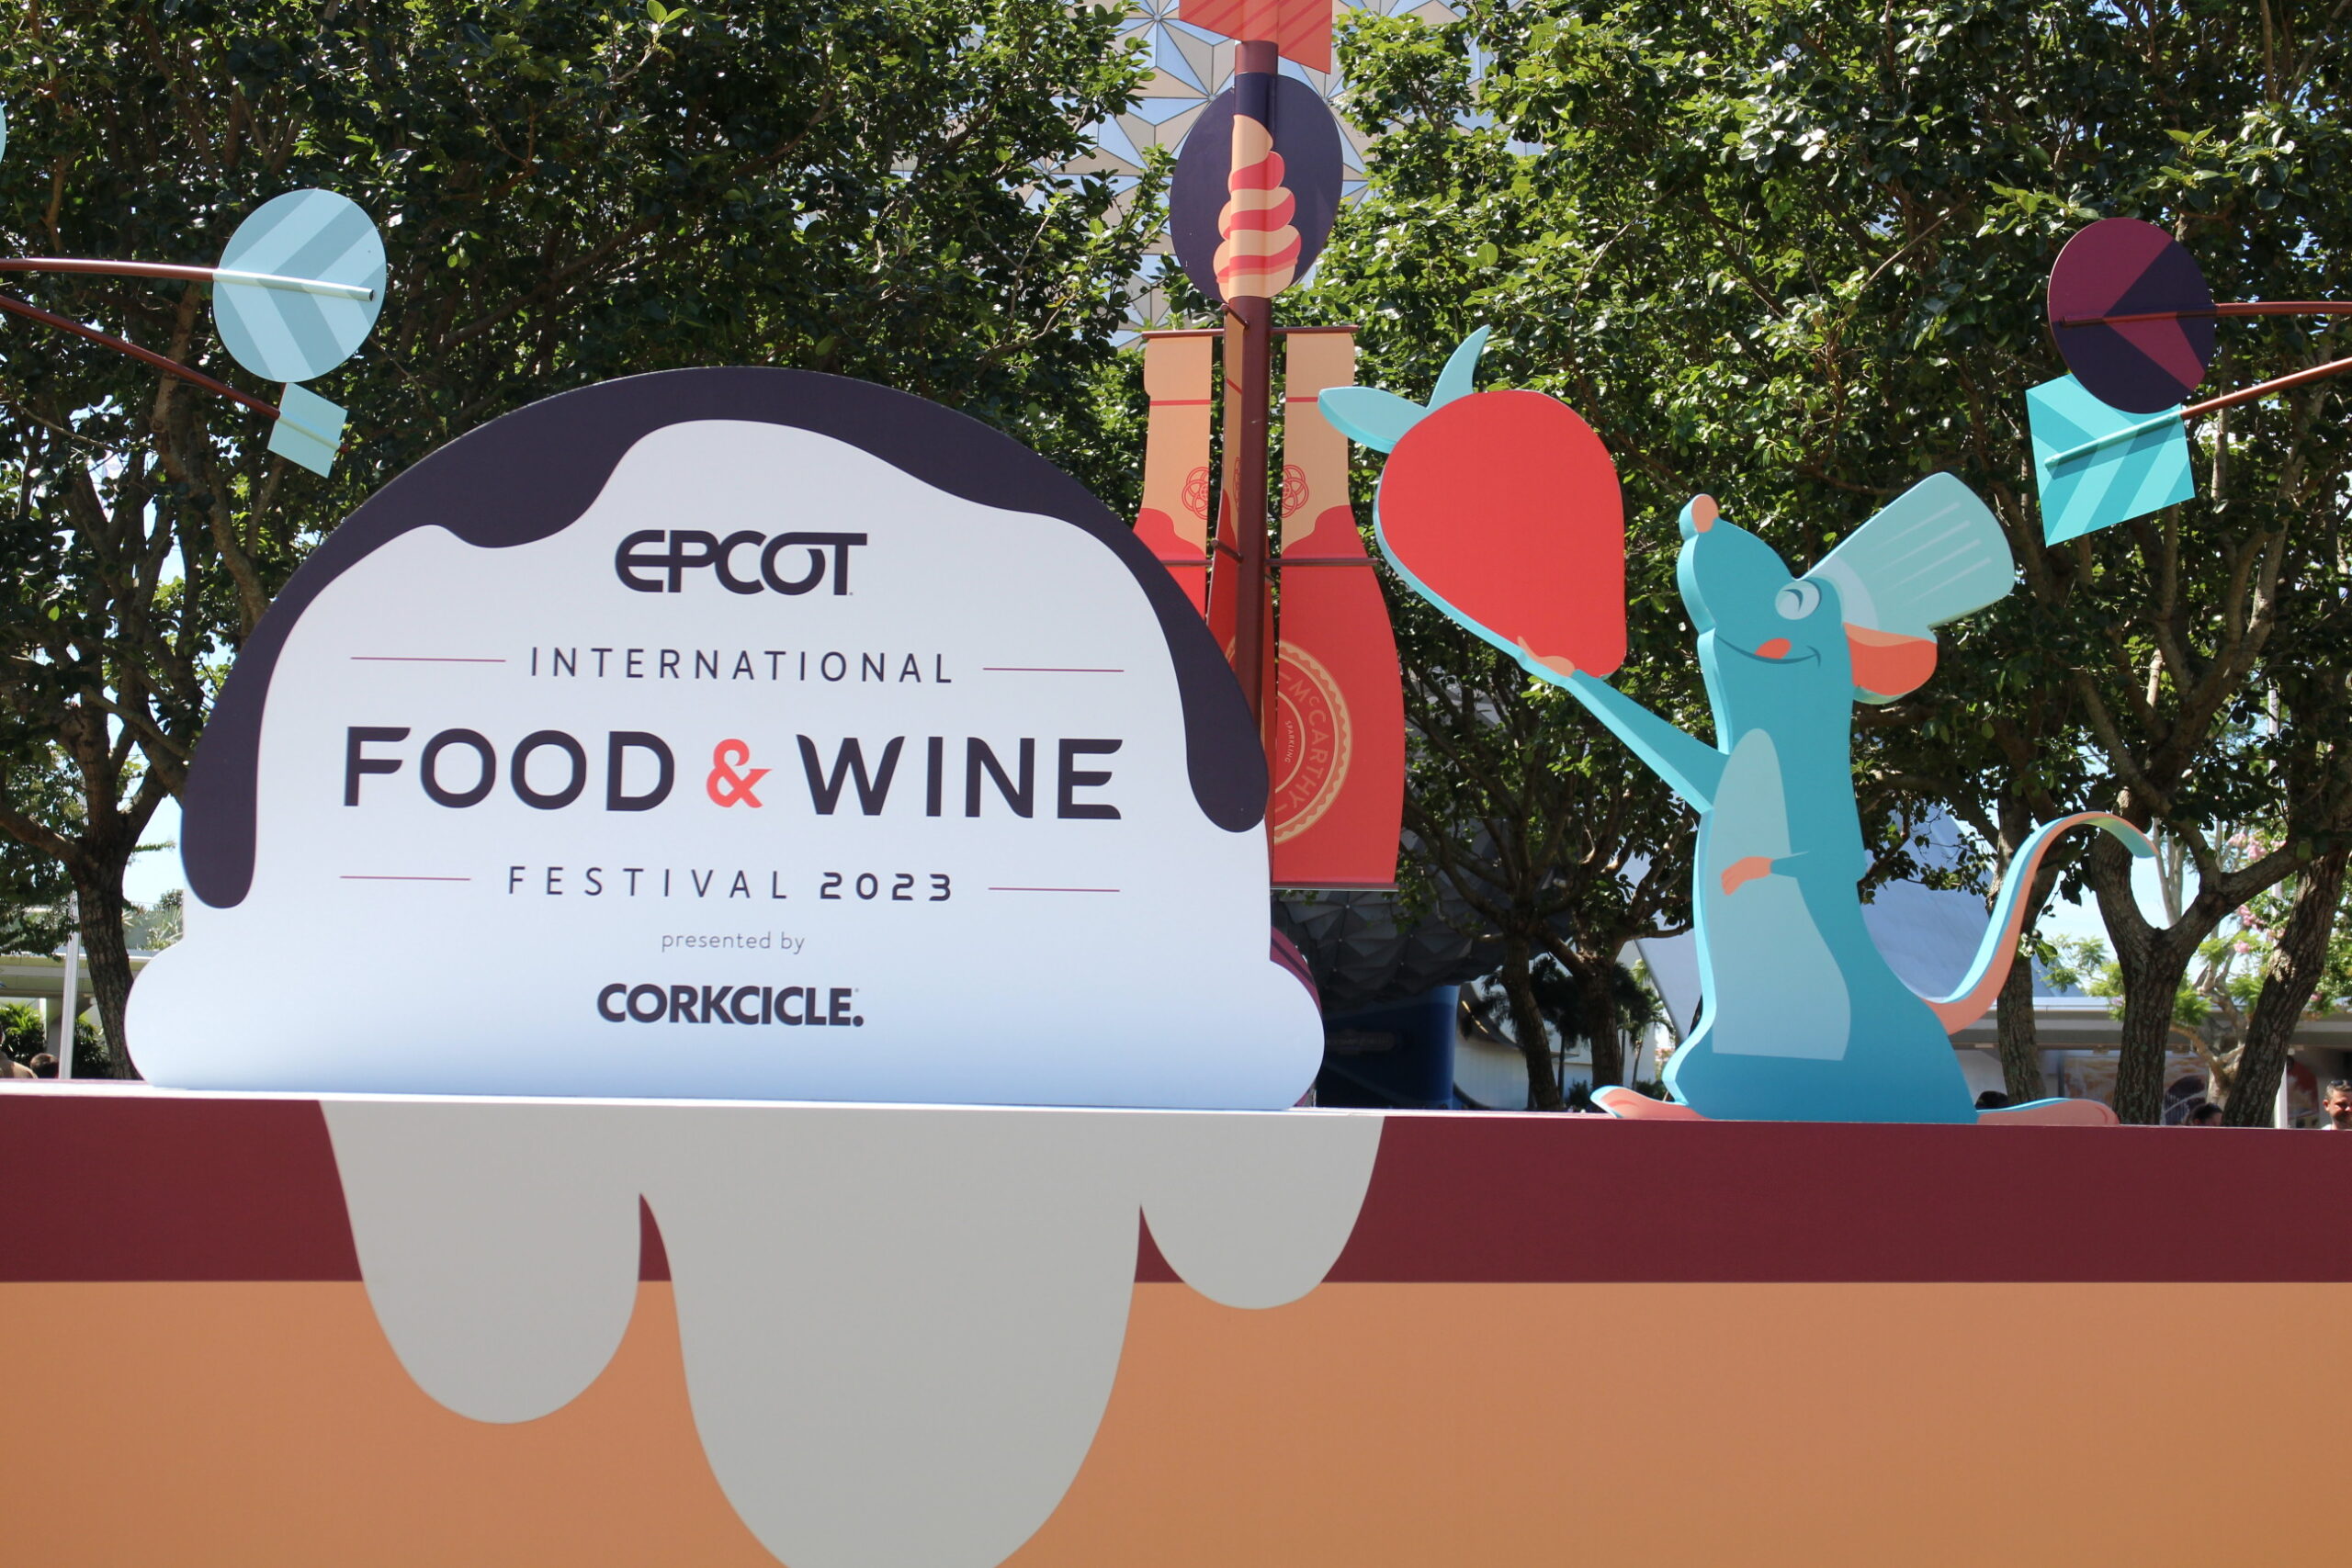 Epcot Food and Wine 2023 Entrance Sign featuring Remy the rat holding a strawberry